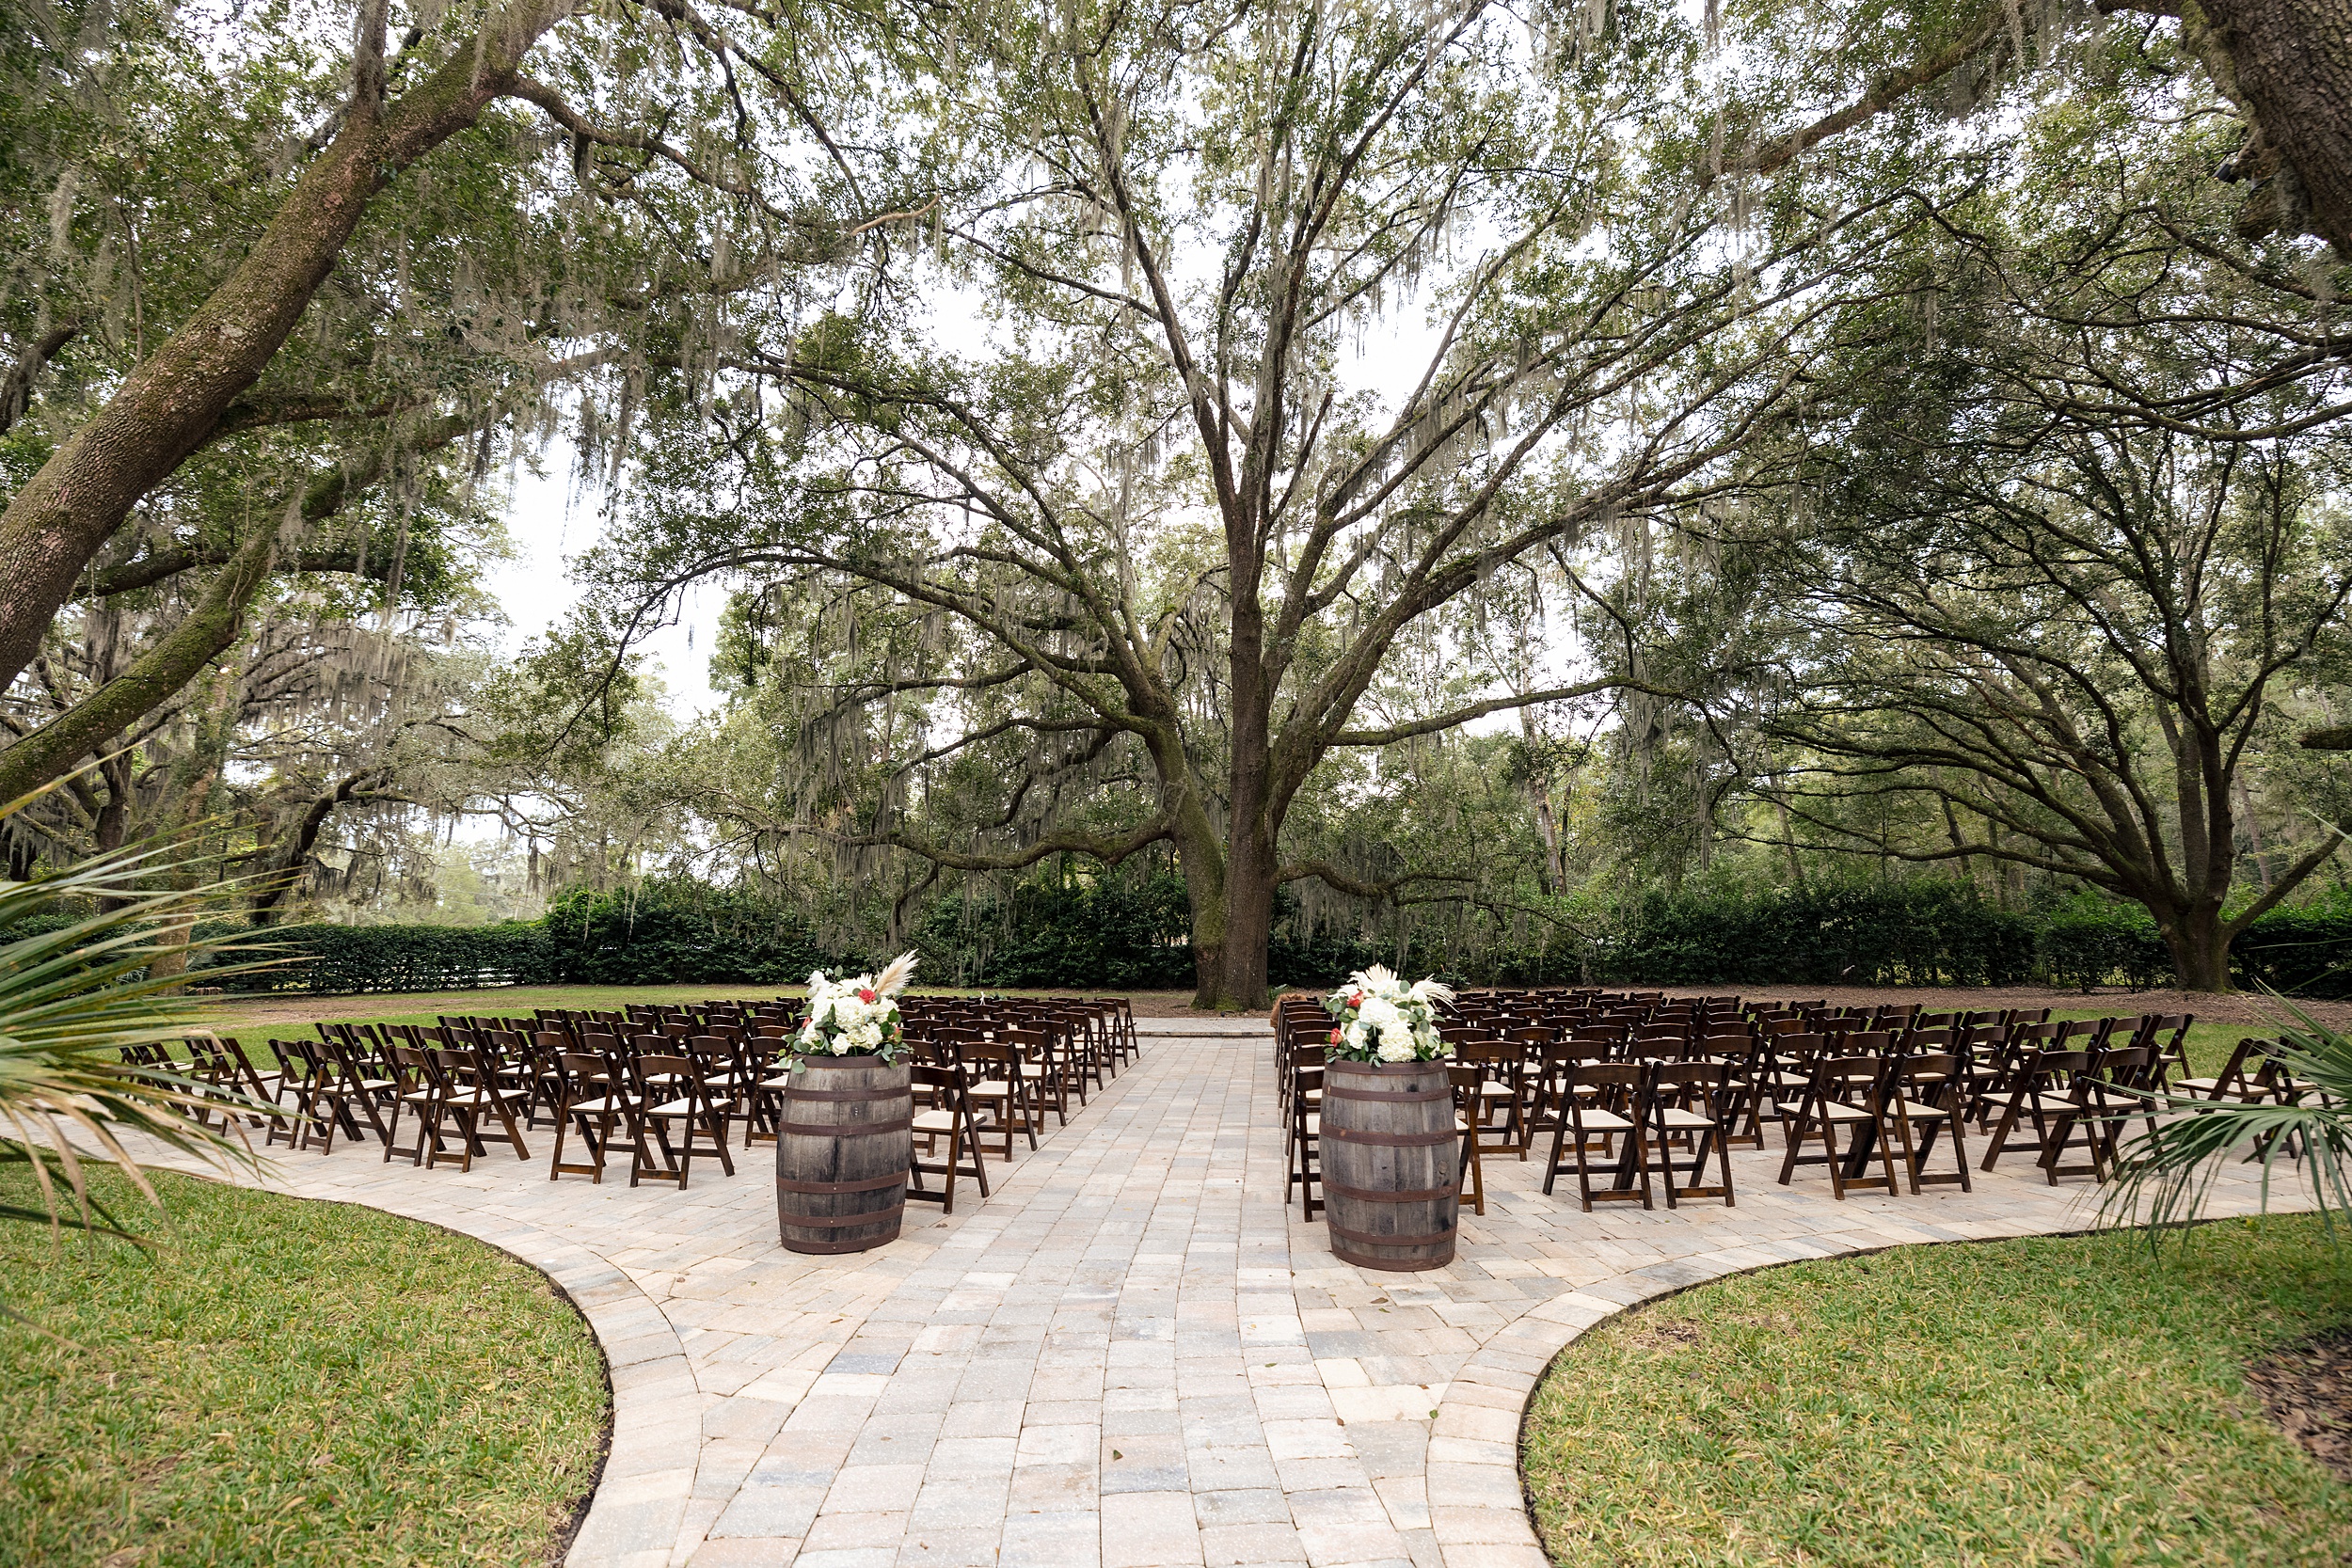 Details of a bowing oaks wedding ceremony set up with wooden chairs on a patio under large oak trees